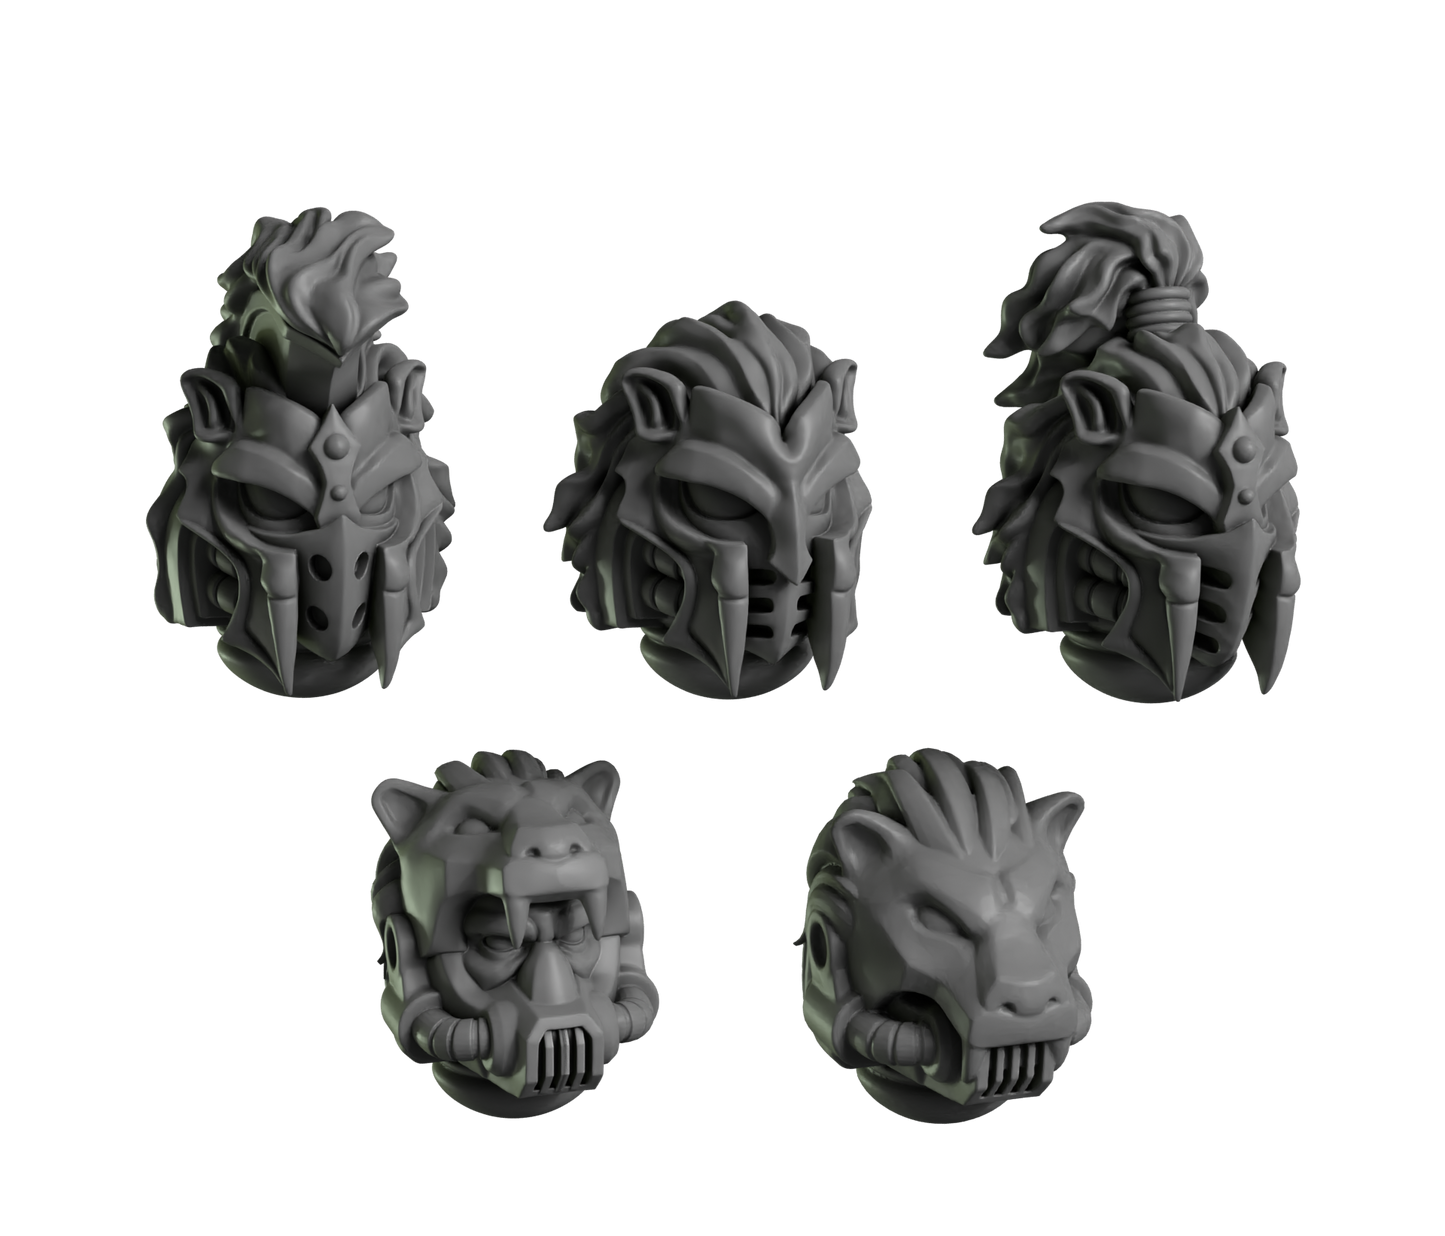 Lion Helmets Pack of Five For Sci Fi Battle Brother Space Warrior Marines Eternal Pilgrims by Greytide Studios. Available in Modern and Classic Scale for 28mm-32mm Tabletop Wargaming